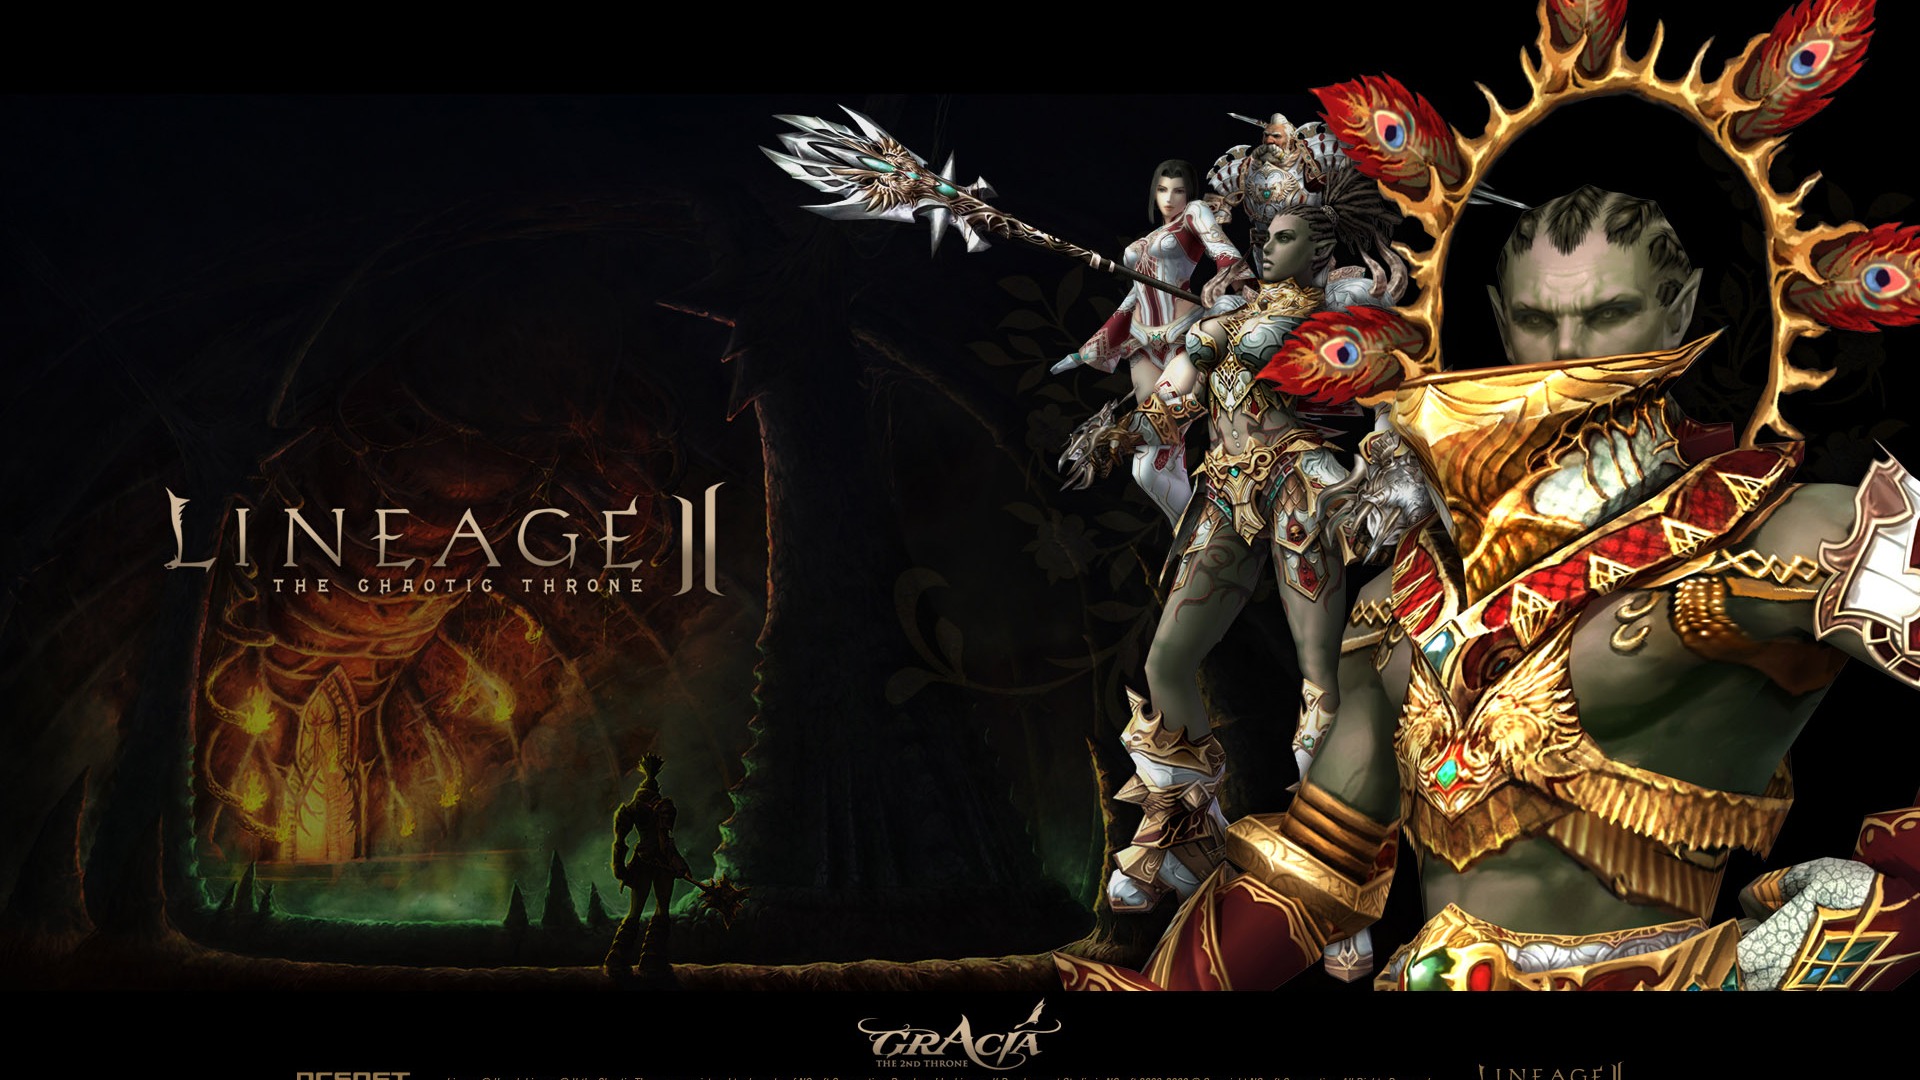 LINEAGE Ⅱ modeling HD gaming wallpapers #2 - 1920x1080